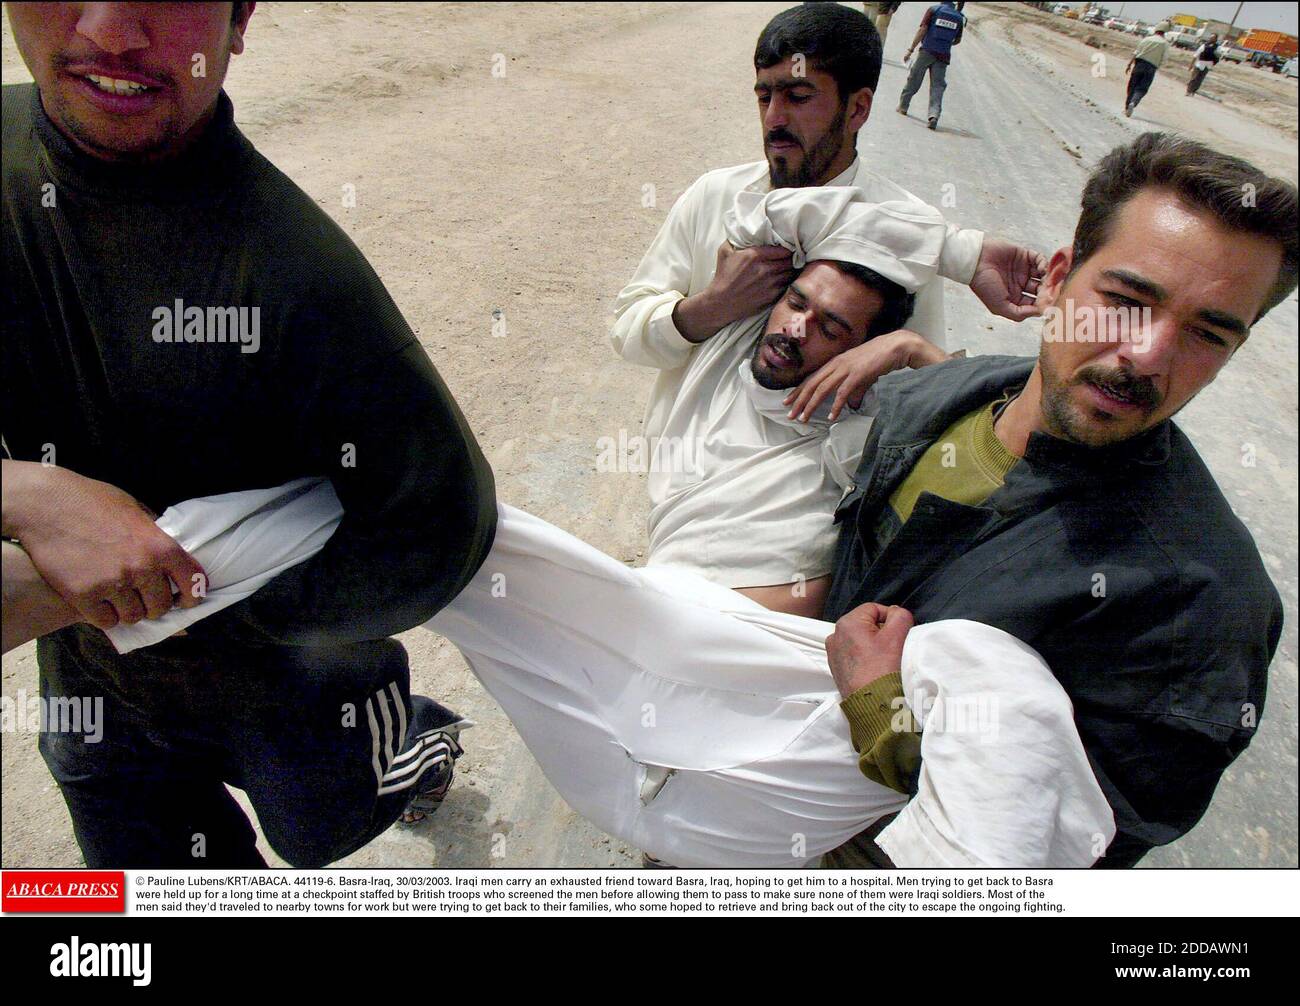 NO FILM, NO VIDEO, NO TV, NO DOCUMENTARY - © Pauline Lubens/KRT/ABACA. 44119-6. Basra-Iraq, 30/03/2003. Iraqi men carry an exhausted friend toward Basra, Iraq, hoping to get him to a hospital. Men trying to get back to Basrawere held up for a long time at a checkpoint staffed by British troops who Stock Photo